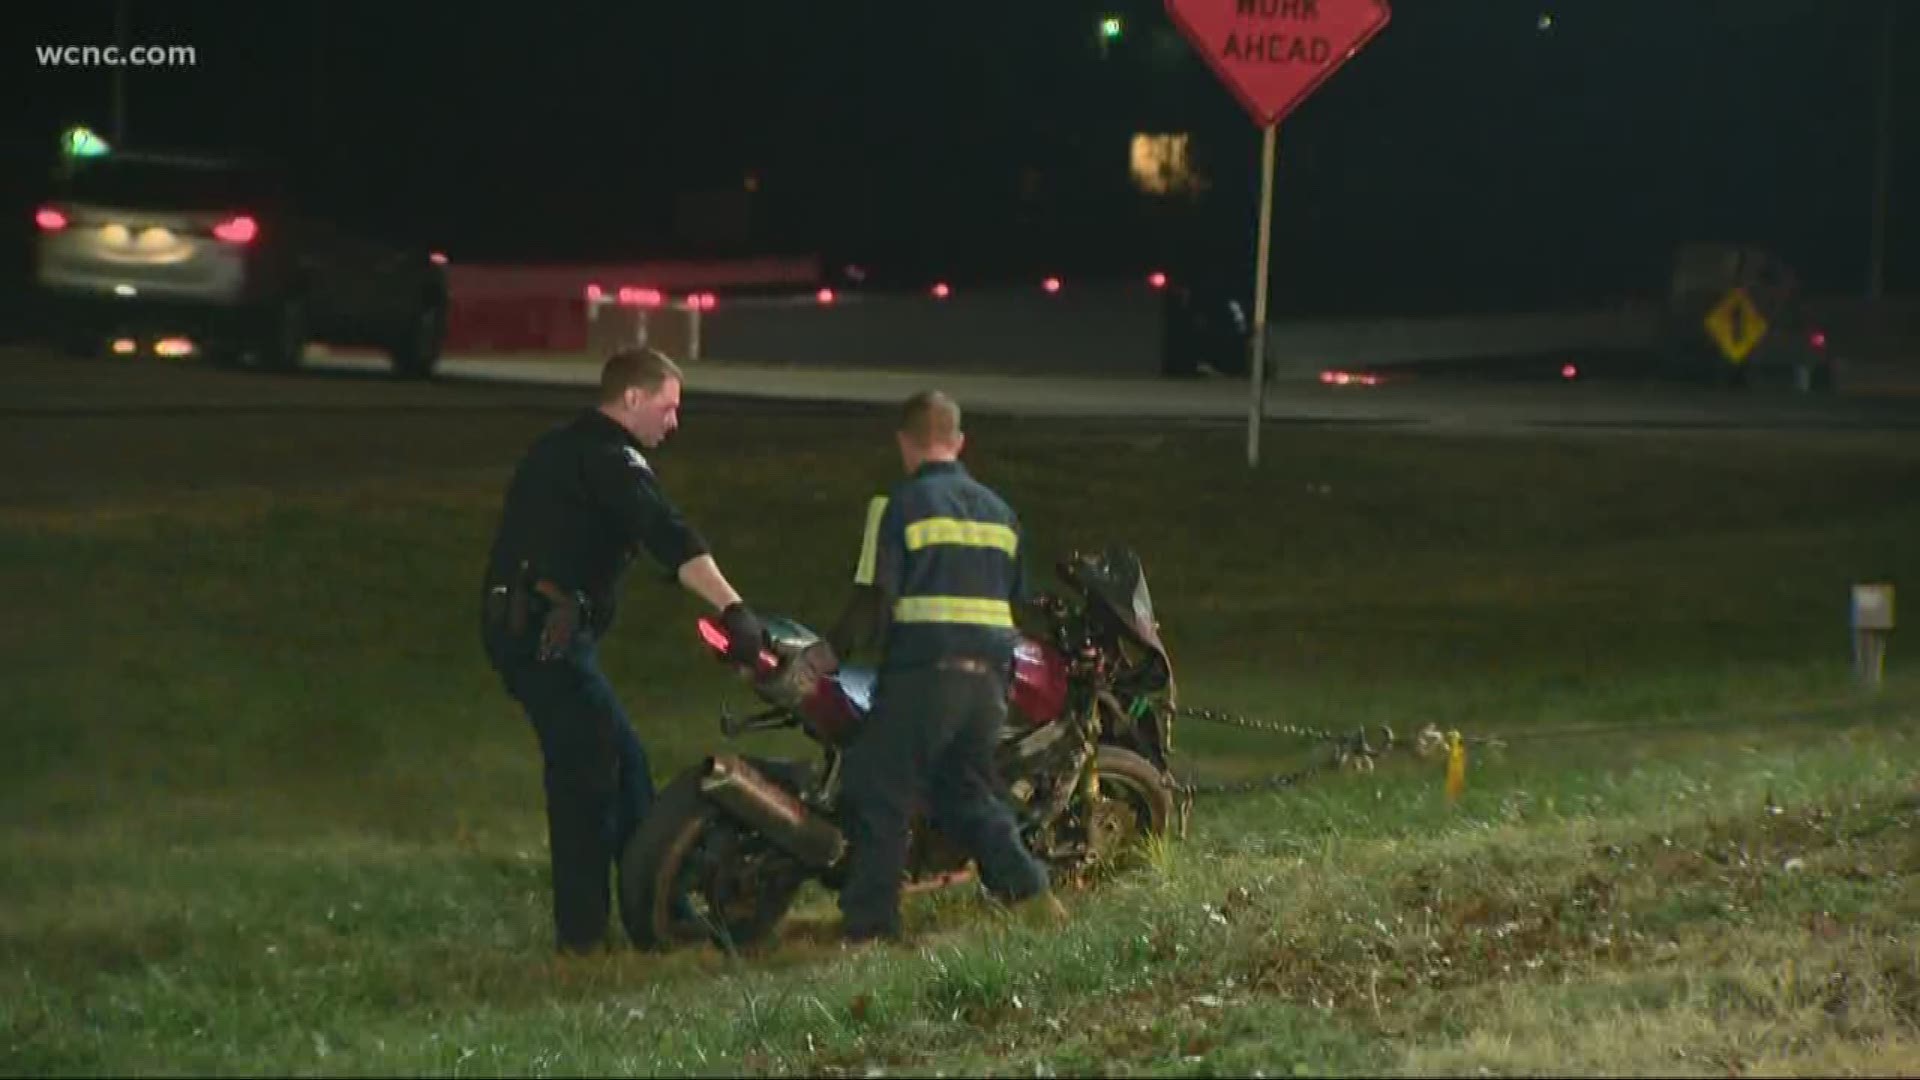 The driver of the motorcycle is expected to live.